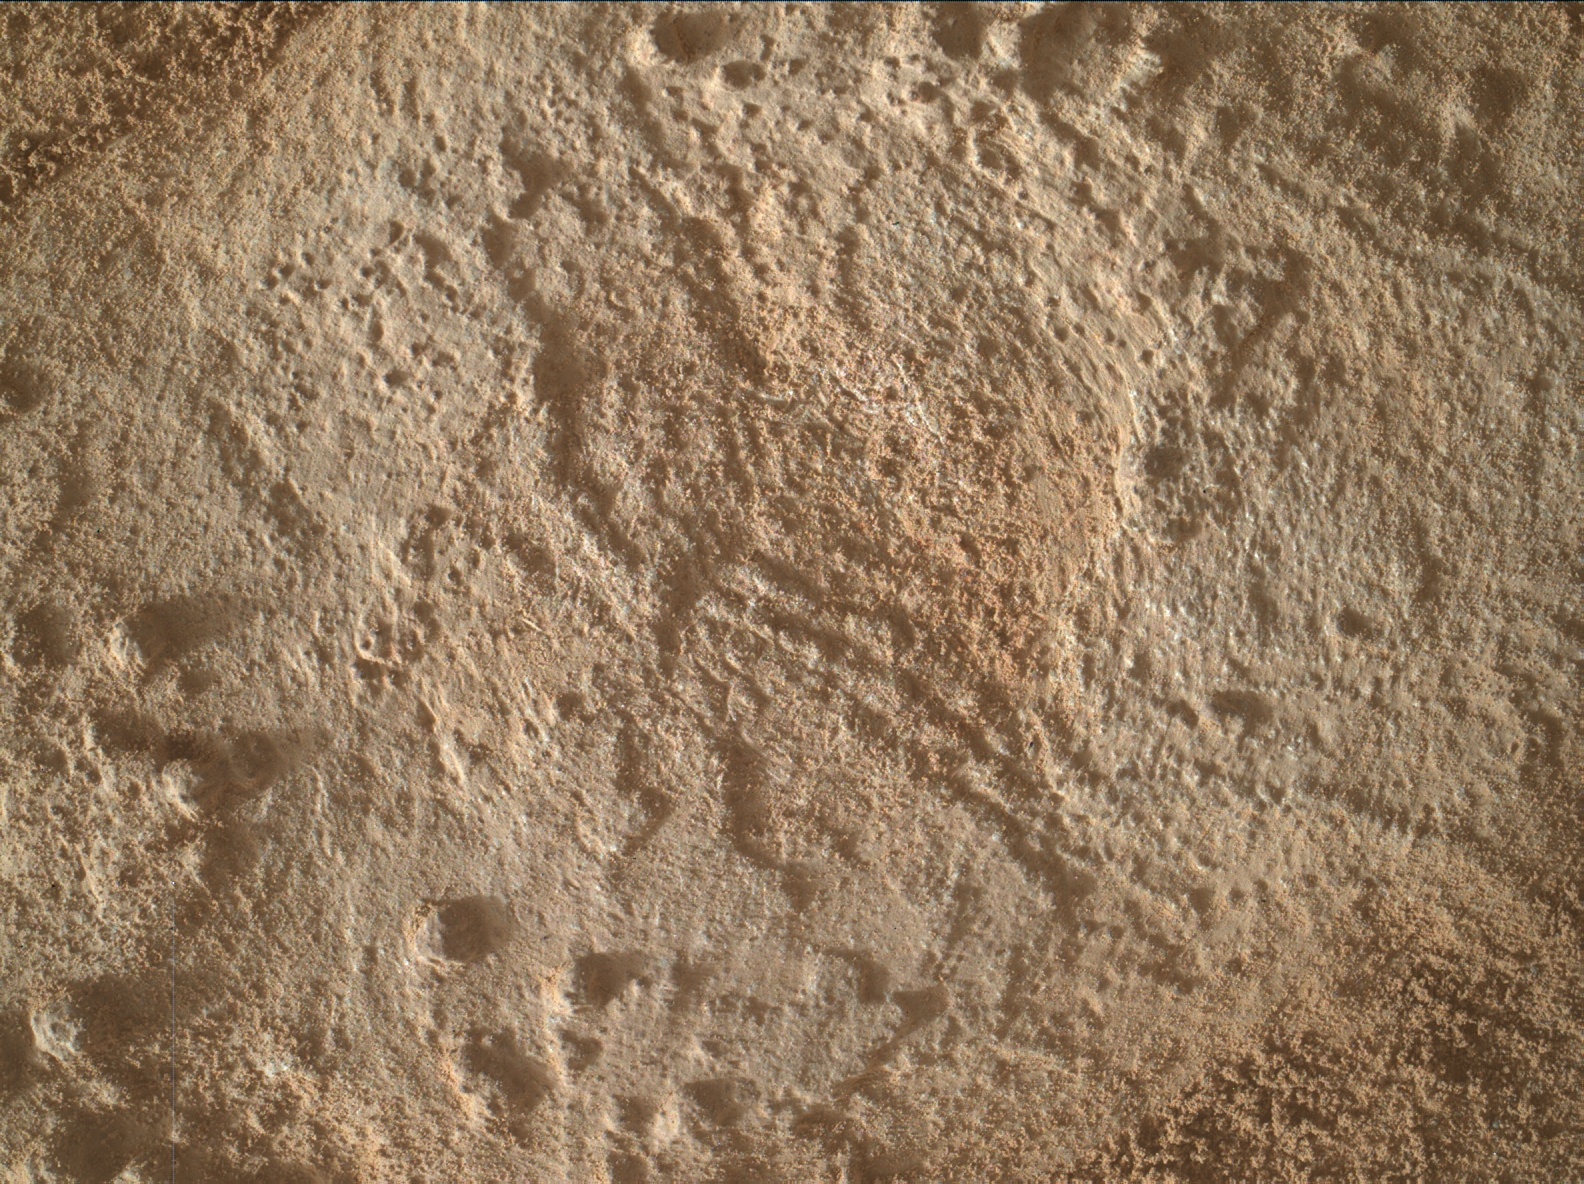 Nasa's Mars rover Curiosity acquired this image using its Mars Hand Lens Imager (MAHLI) on Sol 3344